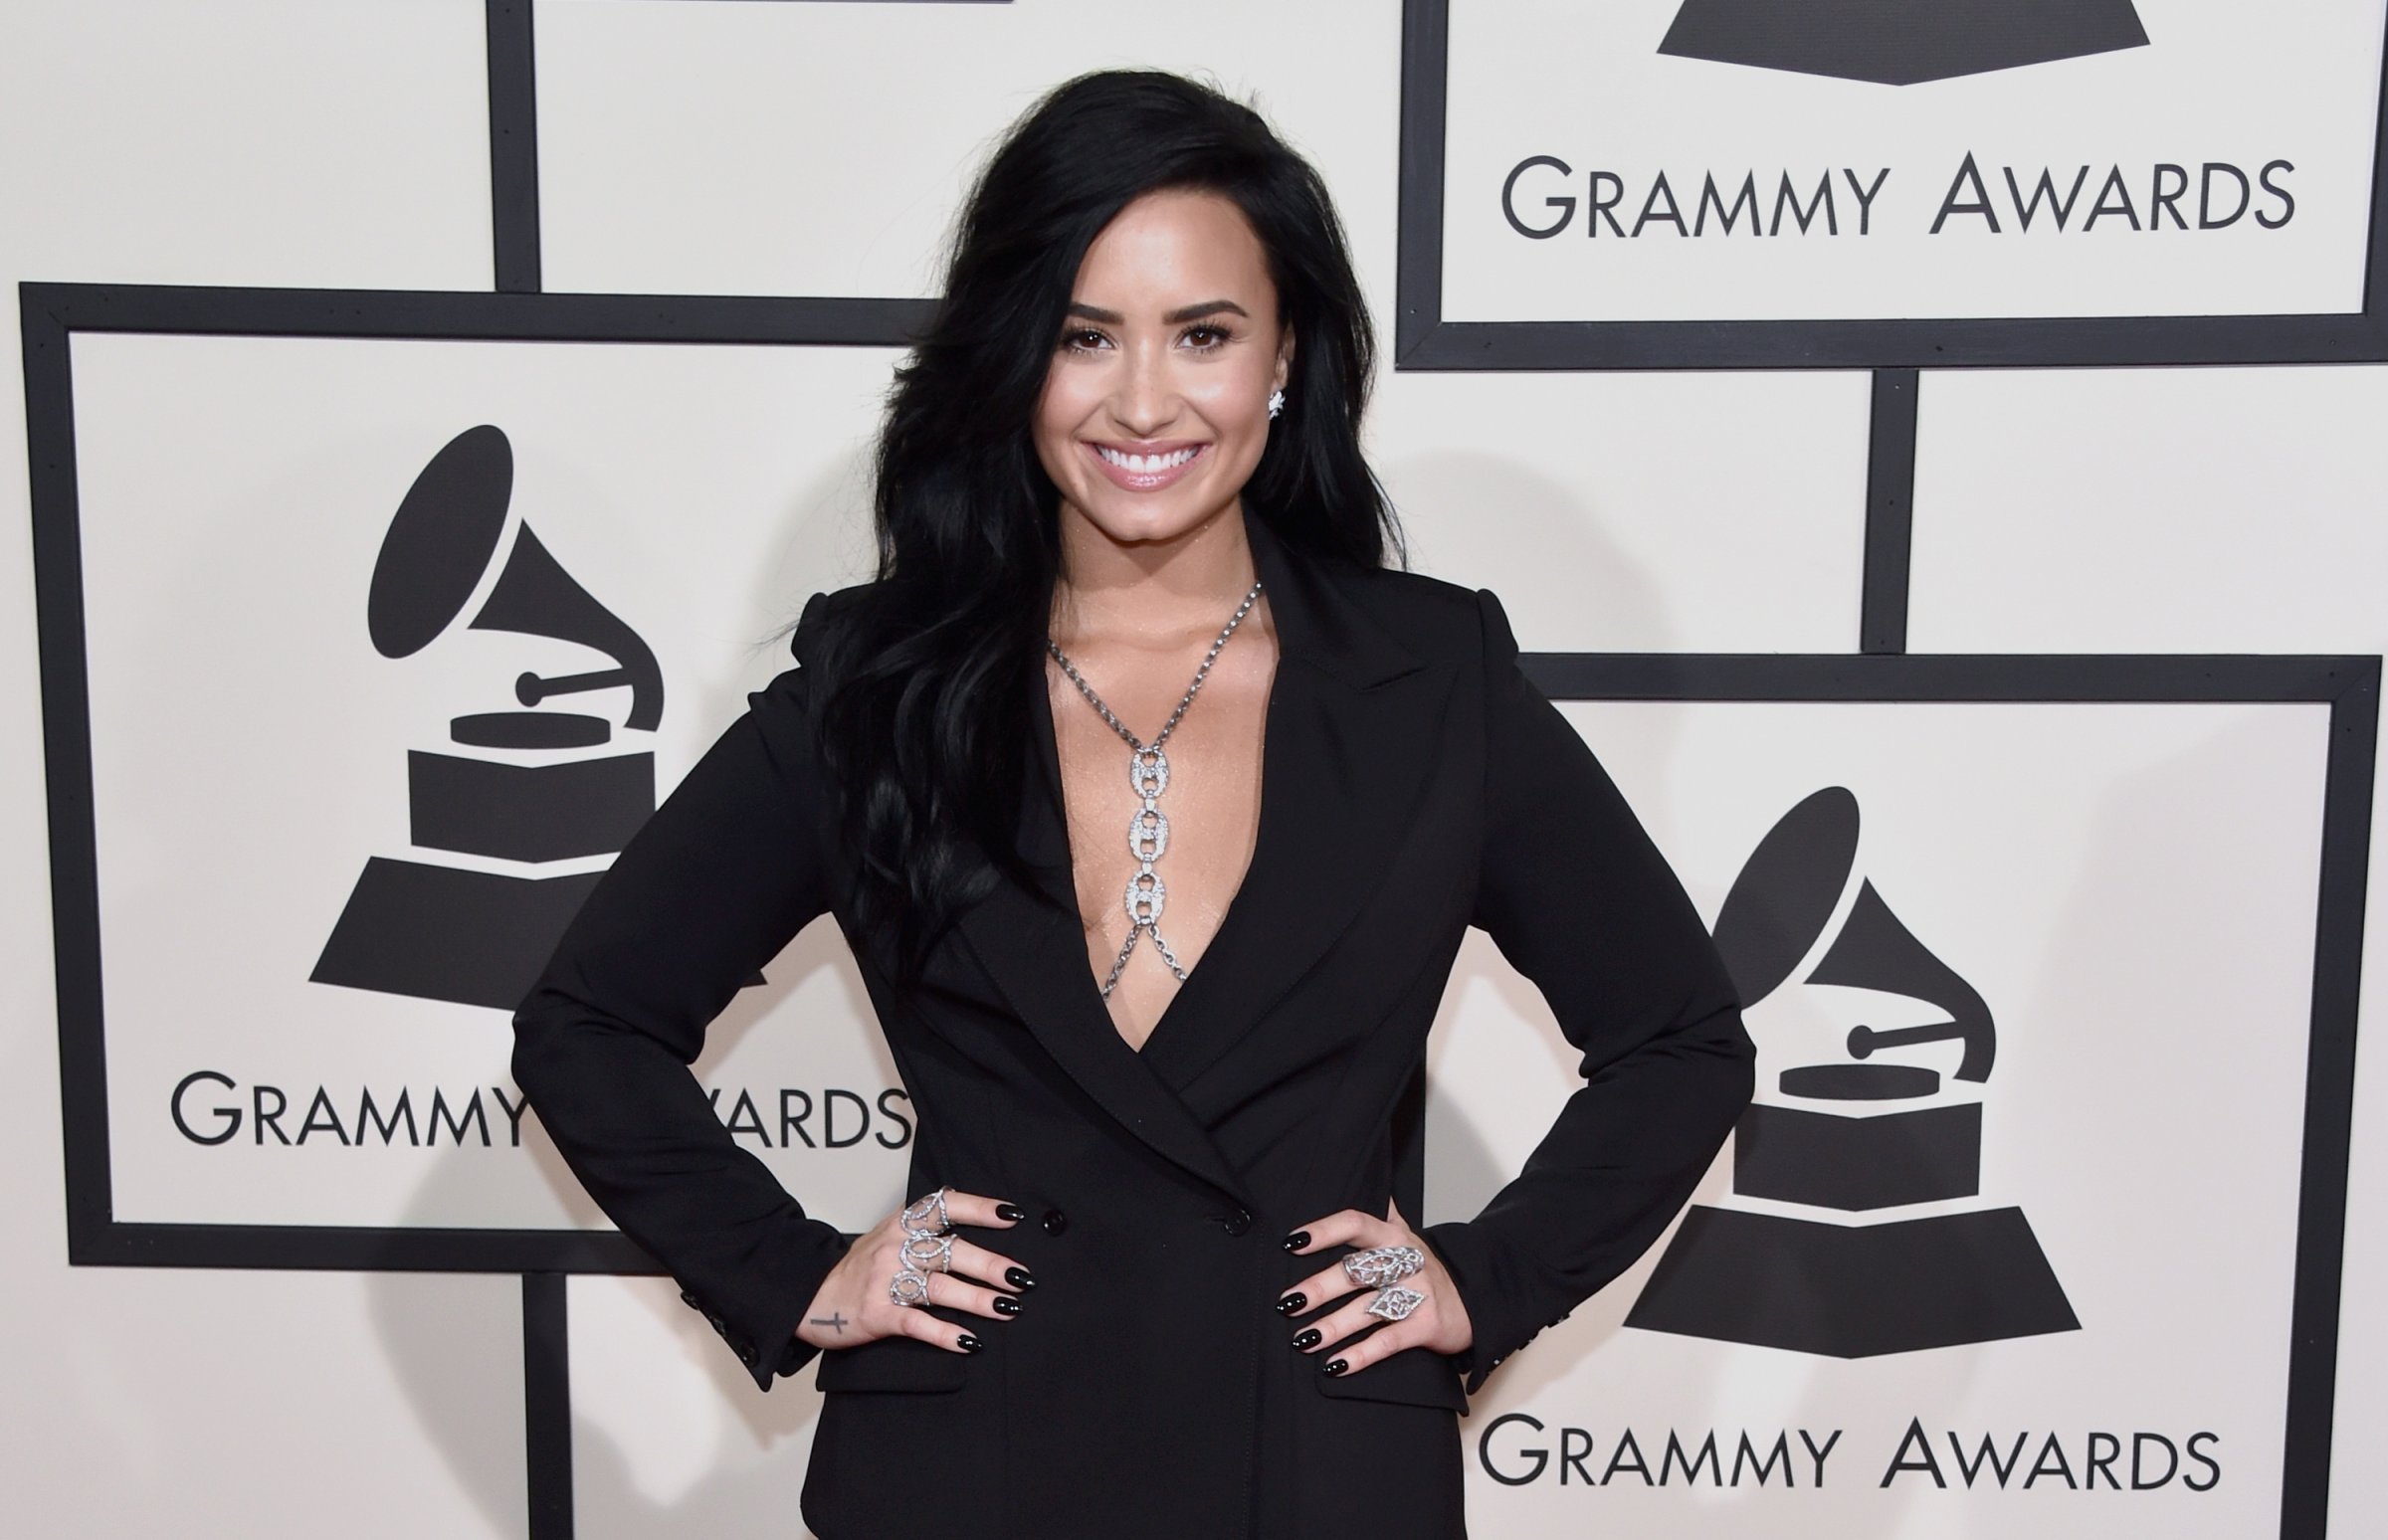 attends The 58th GRAMMY Awards at Staples Center on February 15, 2016 in Los Angeles, California.